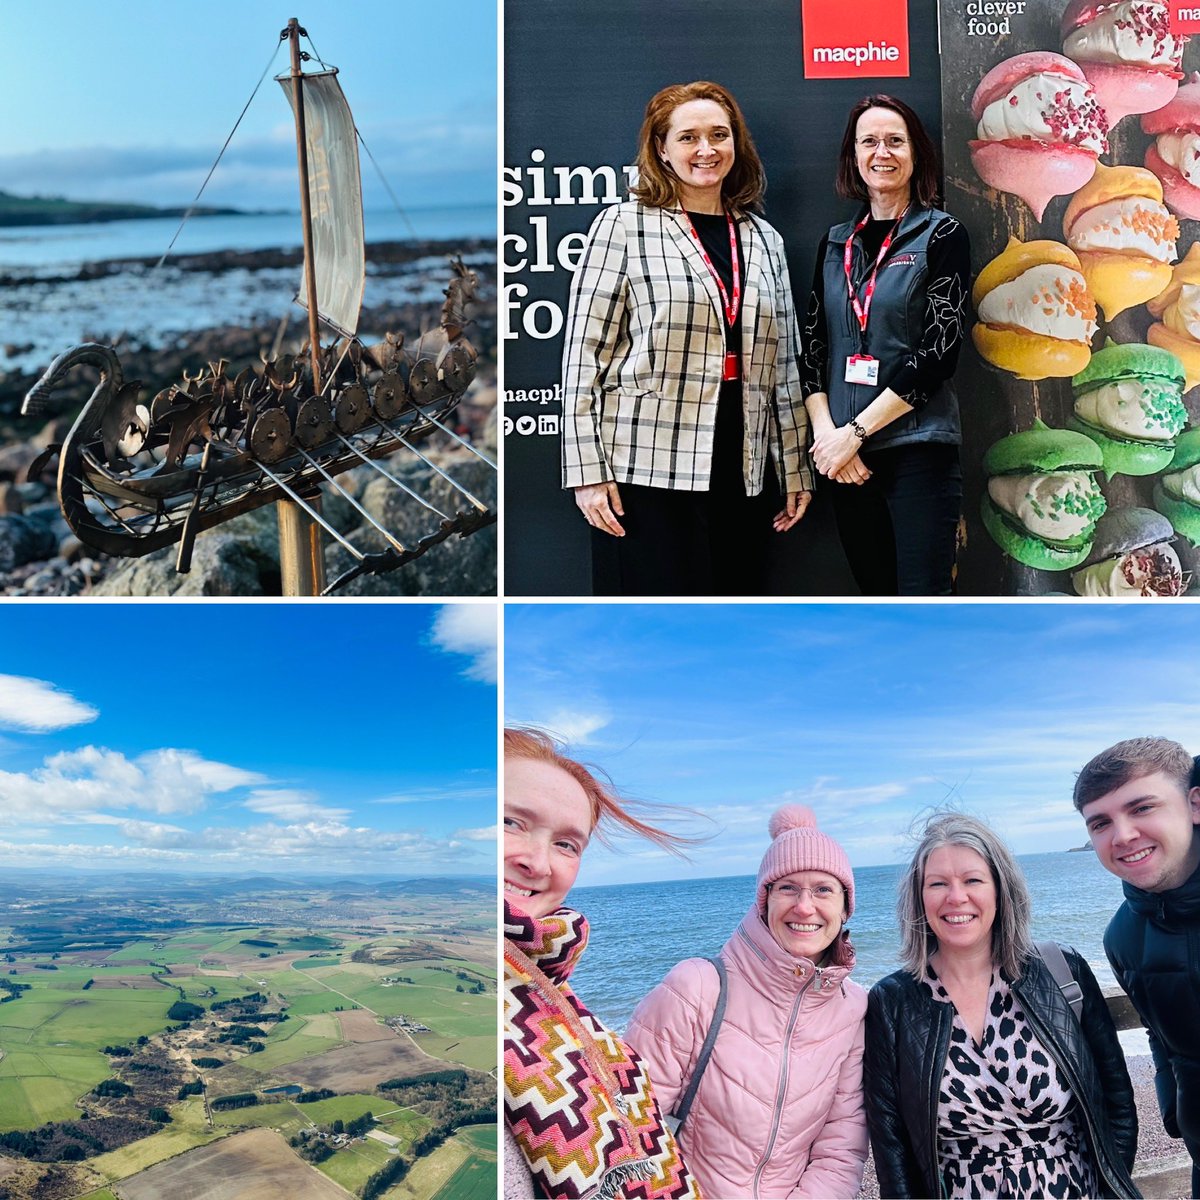 A baketastic couple of days for Claire and Leah’s marketing trip to @MacphieUK. Strengthening connections and baking up new ideas for the future. Here’s to the power of partnership! 🚀👩‍🍳 #AndrewIngredients #Macphie #Collaboration #SupplierVisit #bakeryindustry #foodindustry